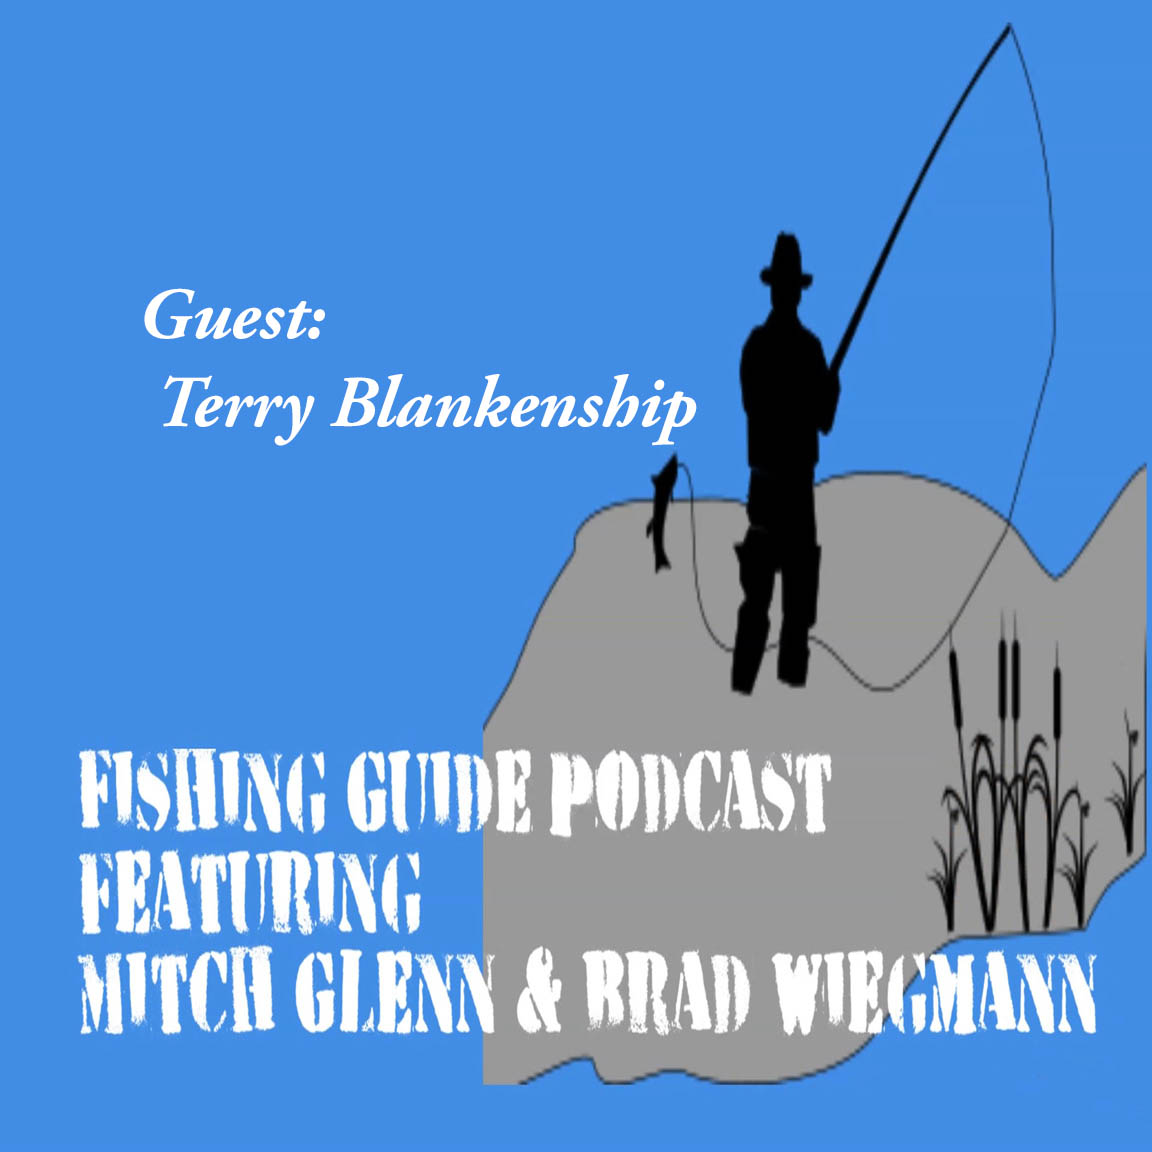 Terry Blankenship Lake of the Ozarks fishing guide talks crappie and bass fishing; in addition to Humminbird electronics